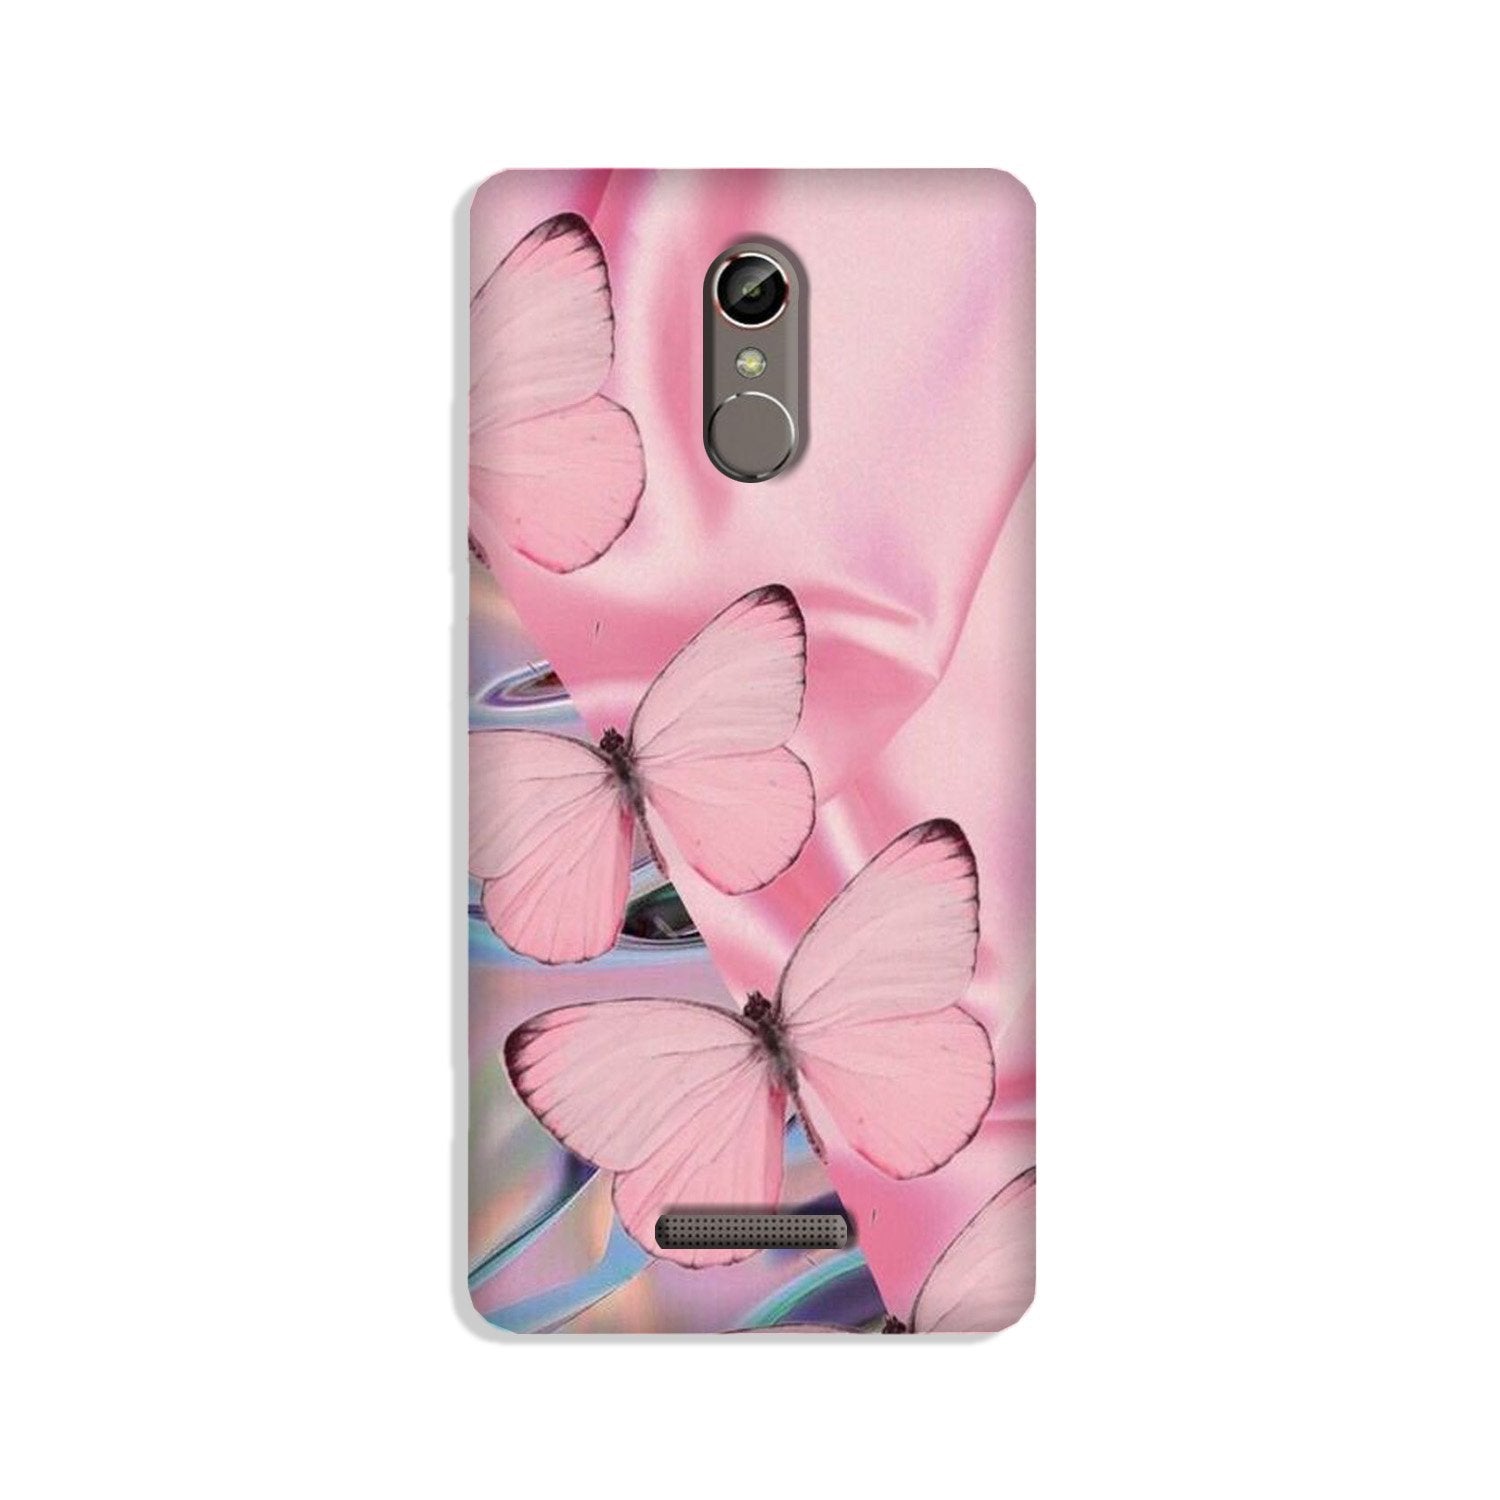 Butterflies Case for Gionee S6s